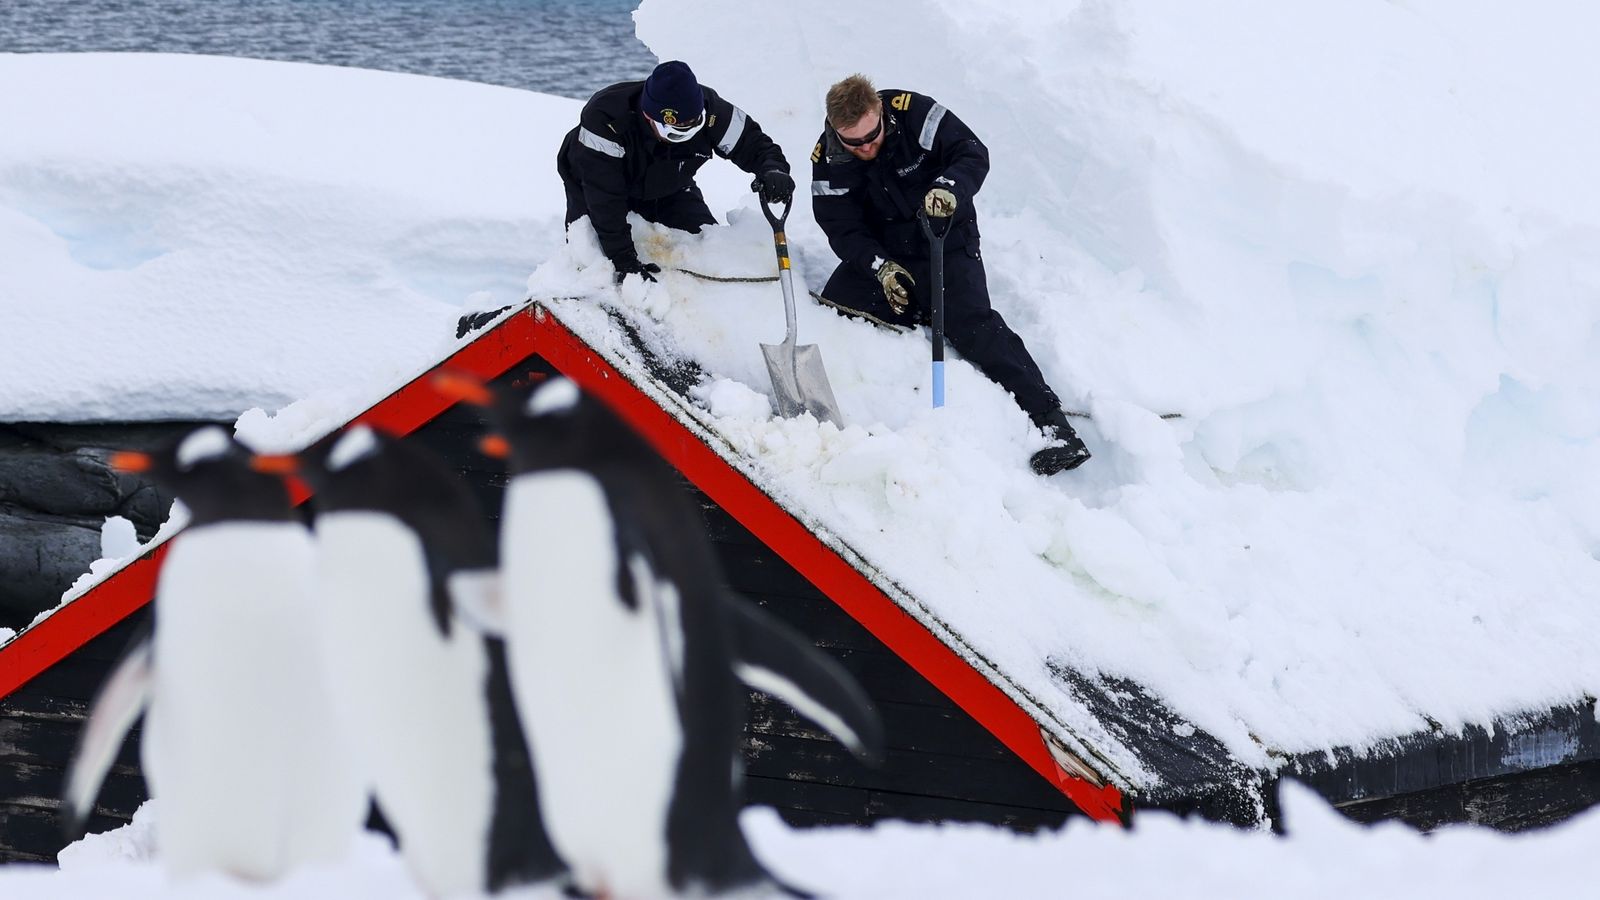 Royal Navy helps dig out world’s most remote post office in Antarctic after 4m deluge of snow